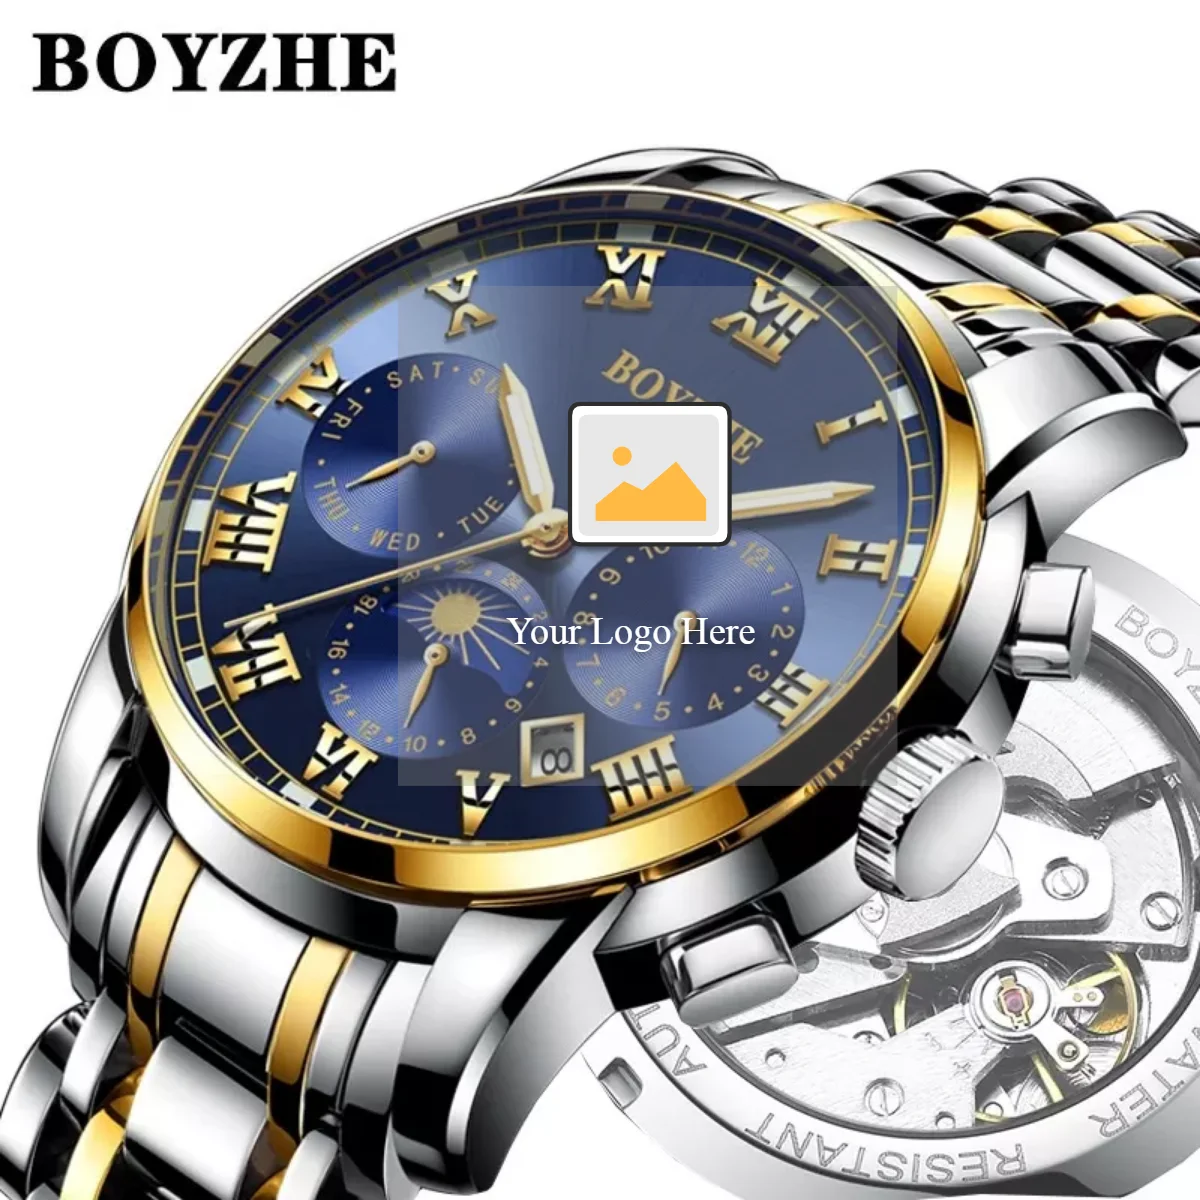 Boyzhe Wholesale Men Watches One Year Warranty Dropshipping Mechanical  Watches Automatic Movement - Buy Dropshipping,Mechanical Watches,Automatic  Movement Product on Alibaba.com